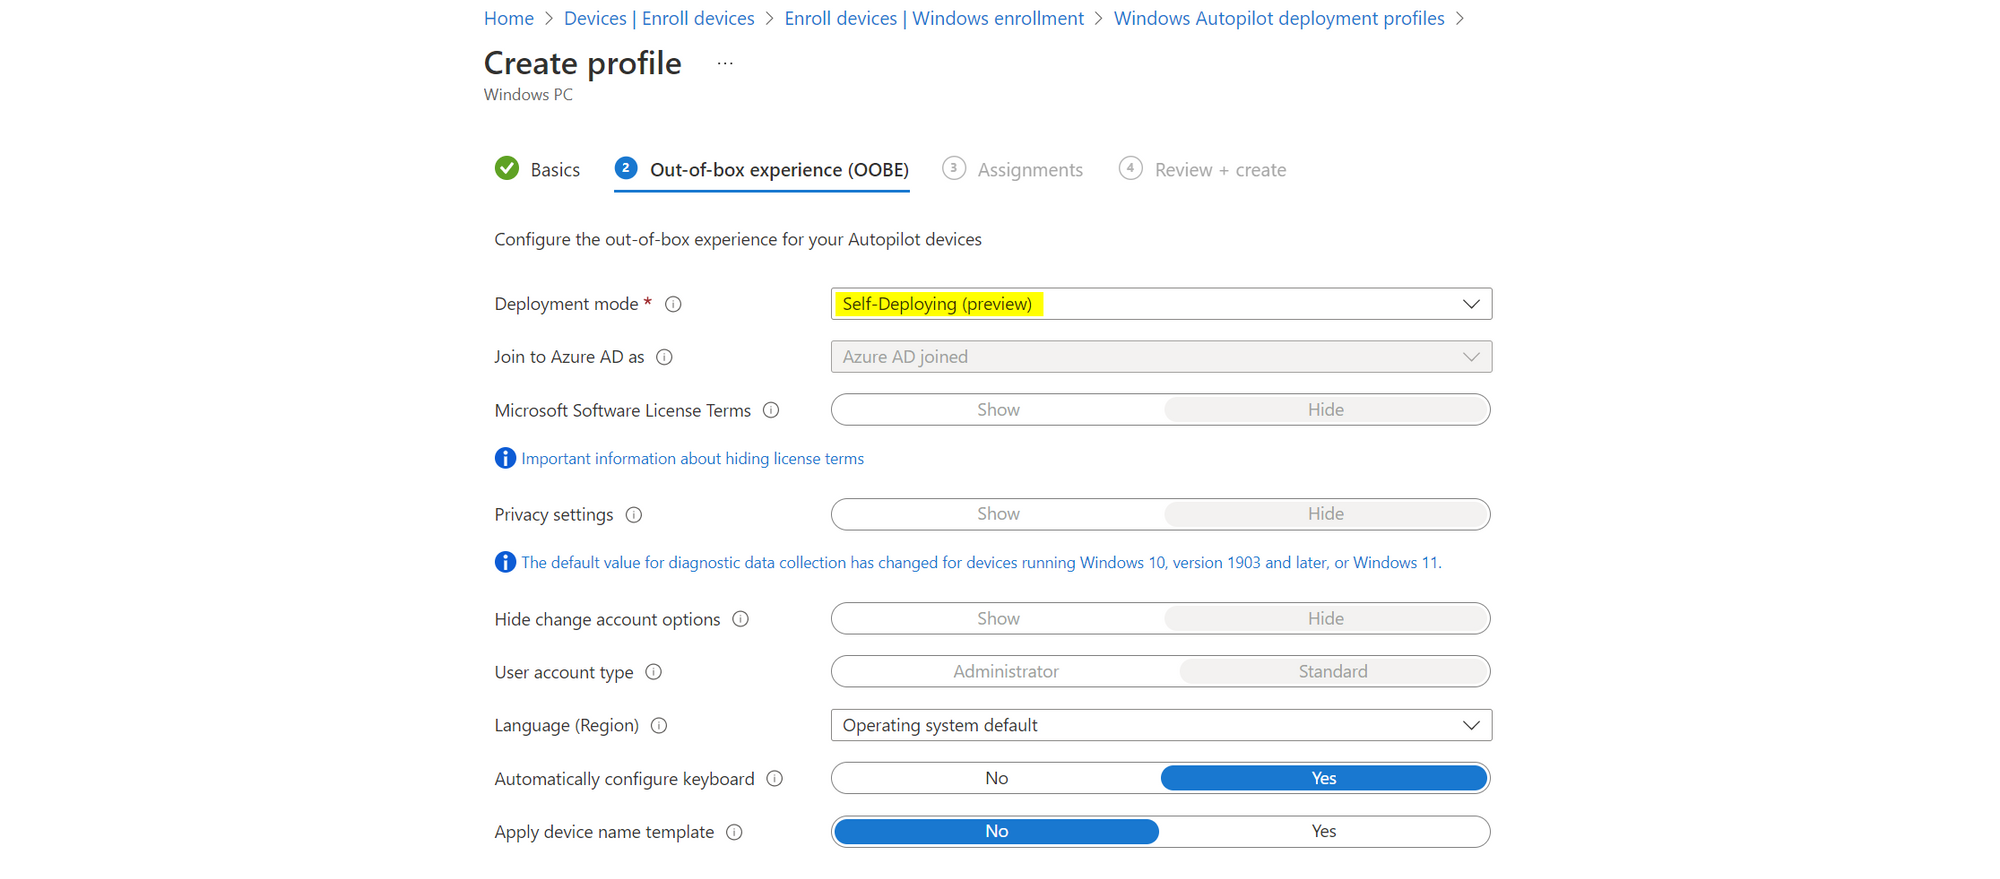 intune-deployment-profile-self-deploying-1.png